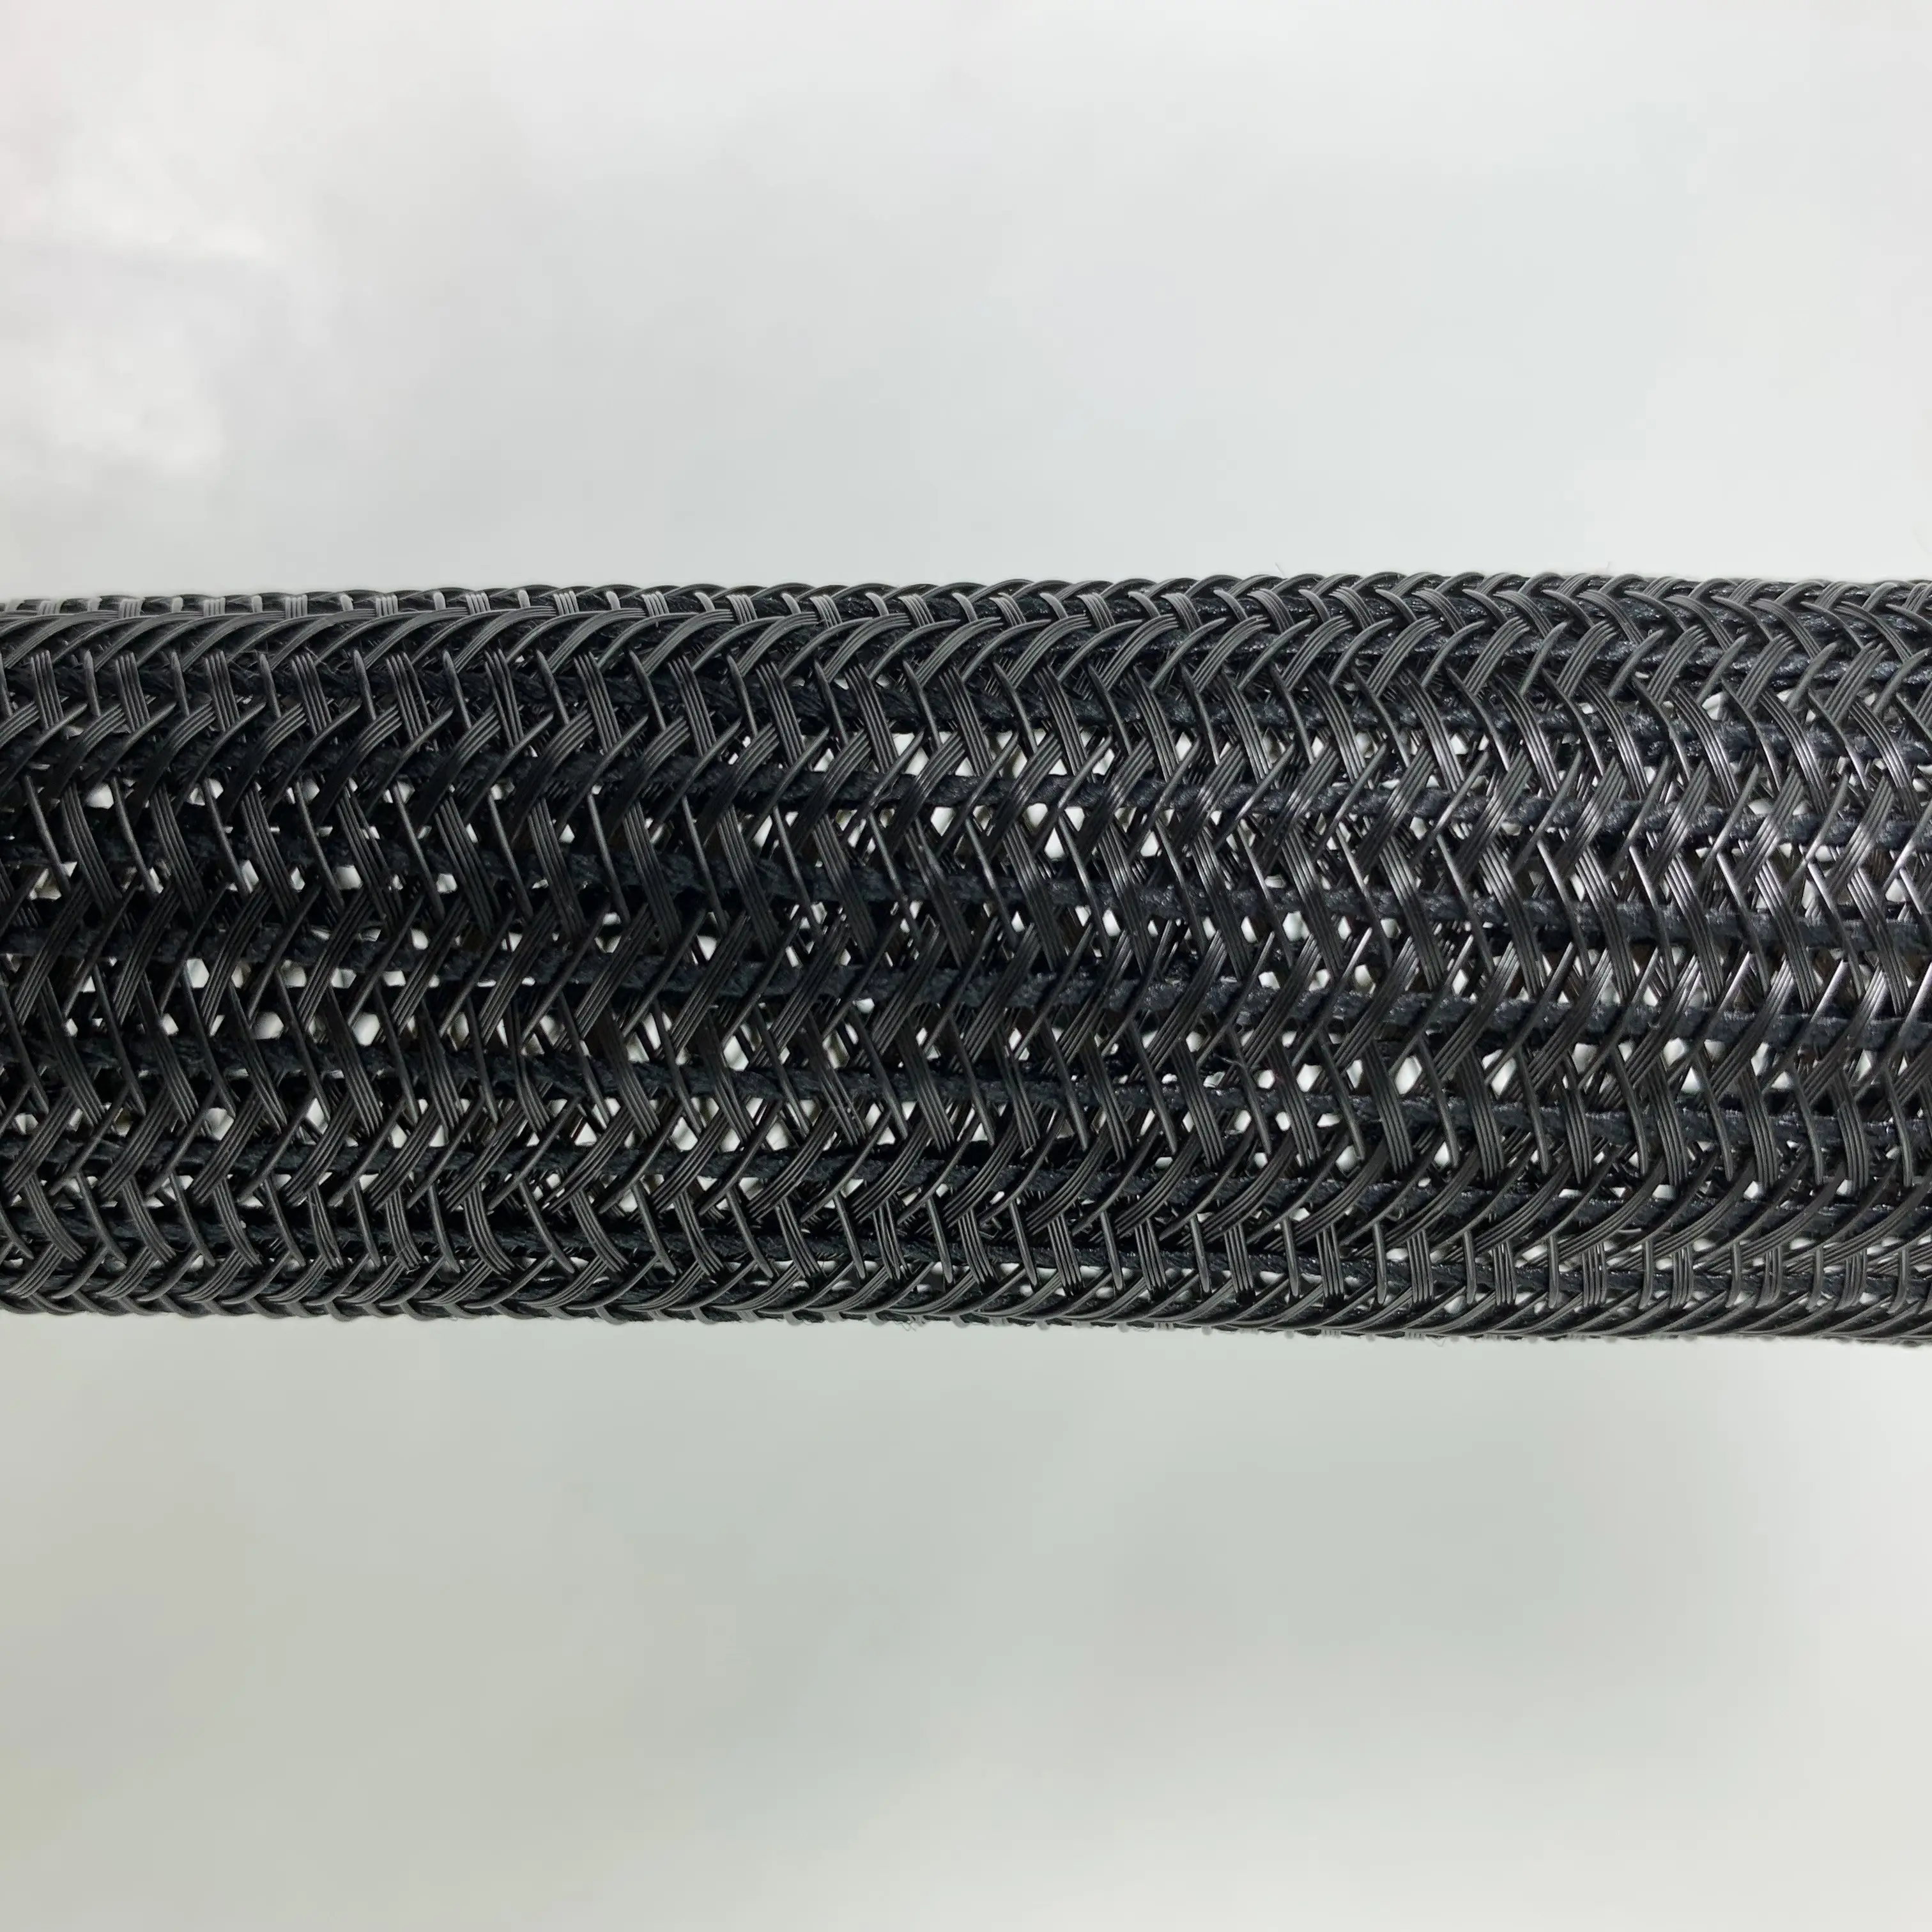 Braided Self-curling Protective Sleeve for Wire and Cables